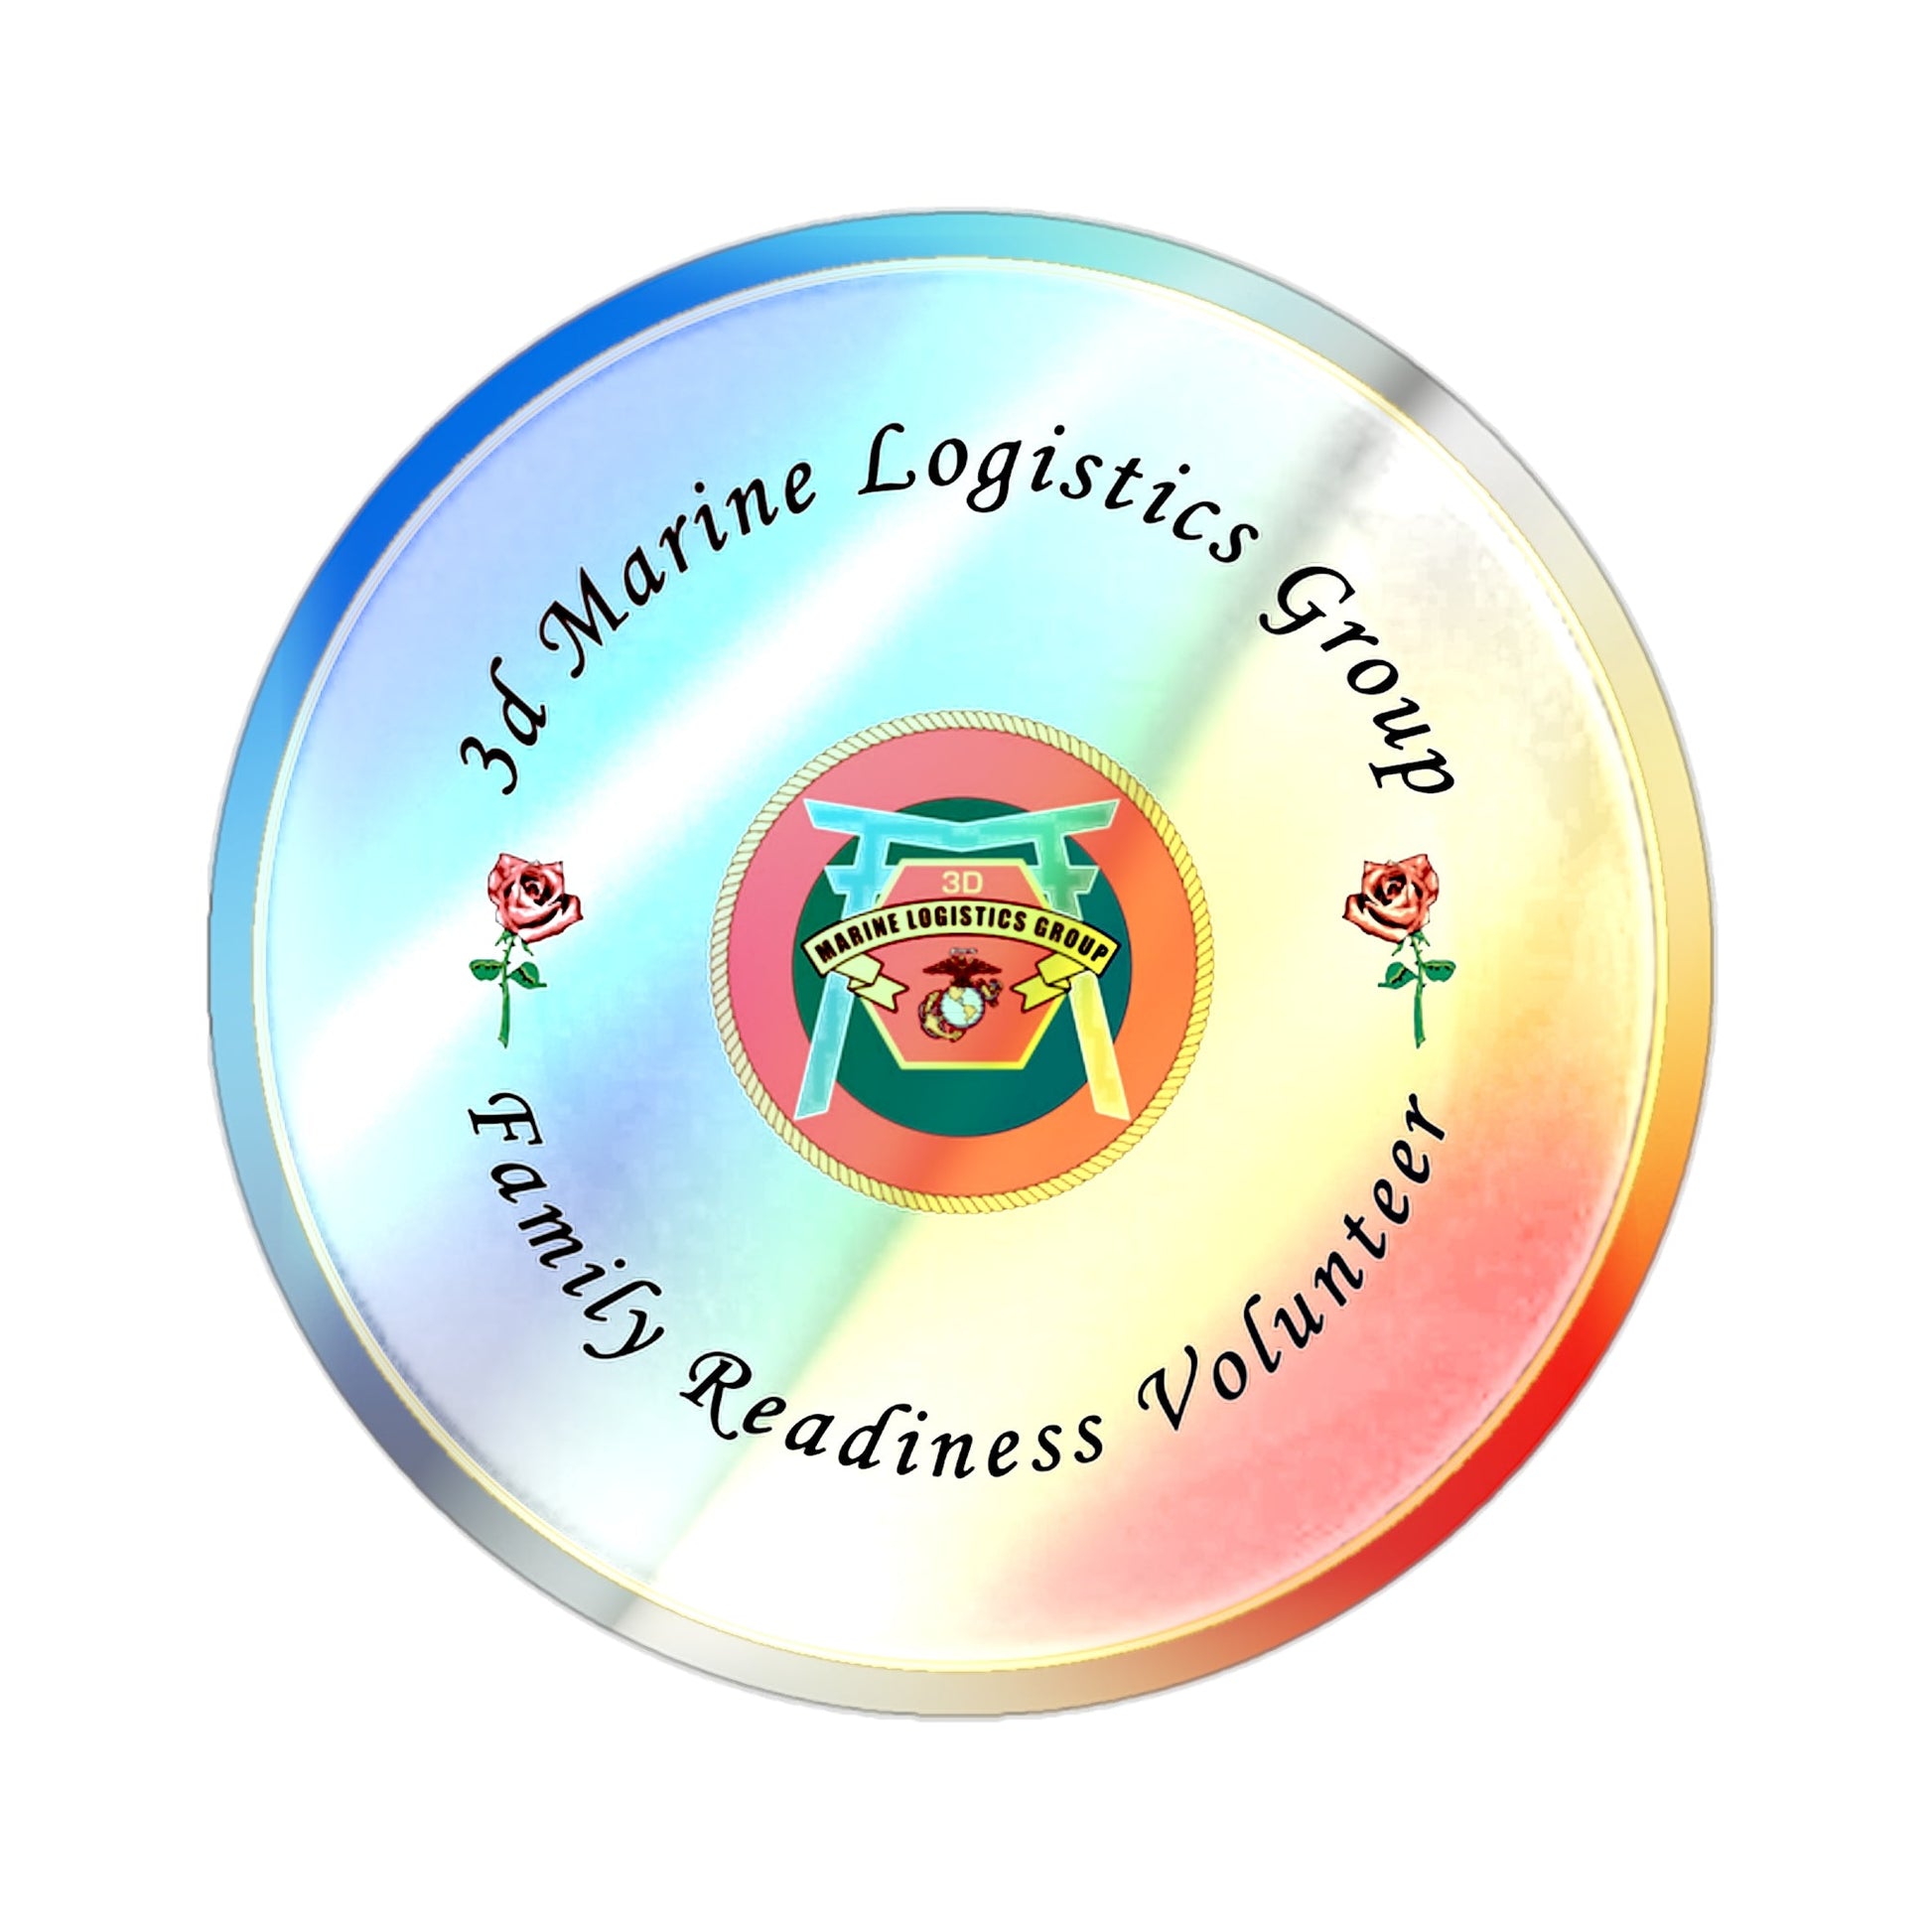 3d Marines Logistics Group Family Readiness Volunteer (USMC) Holographic STICKER Die-Cut Vinyl Decal-2 Inch-The Sticker Space